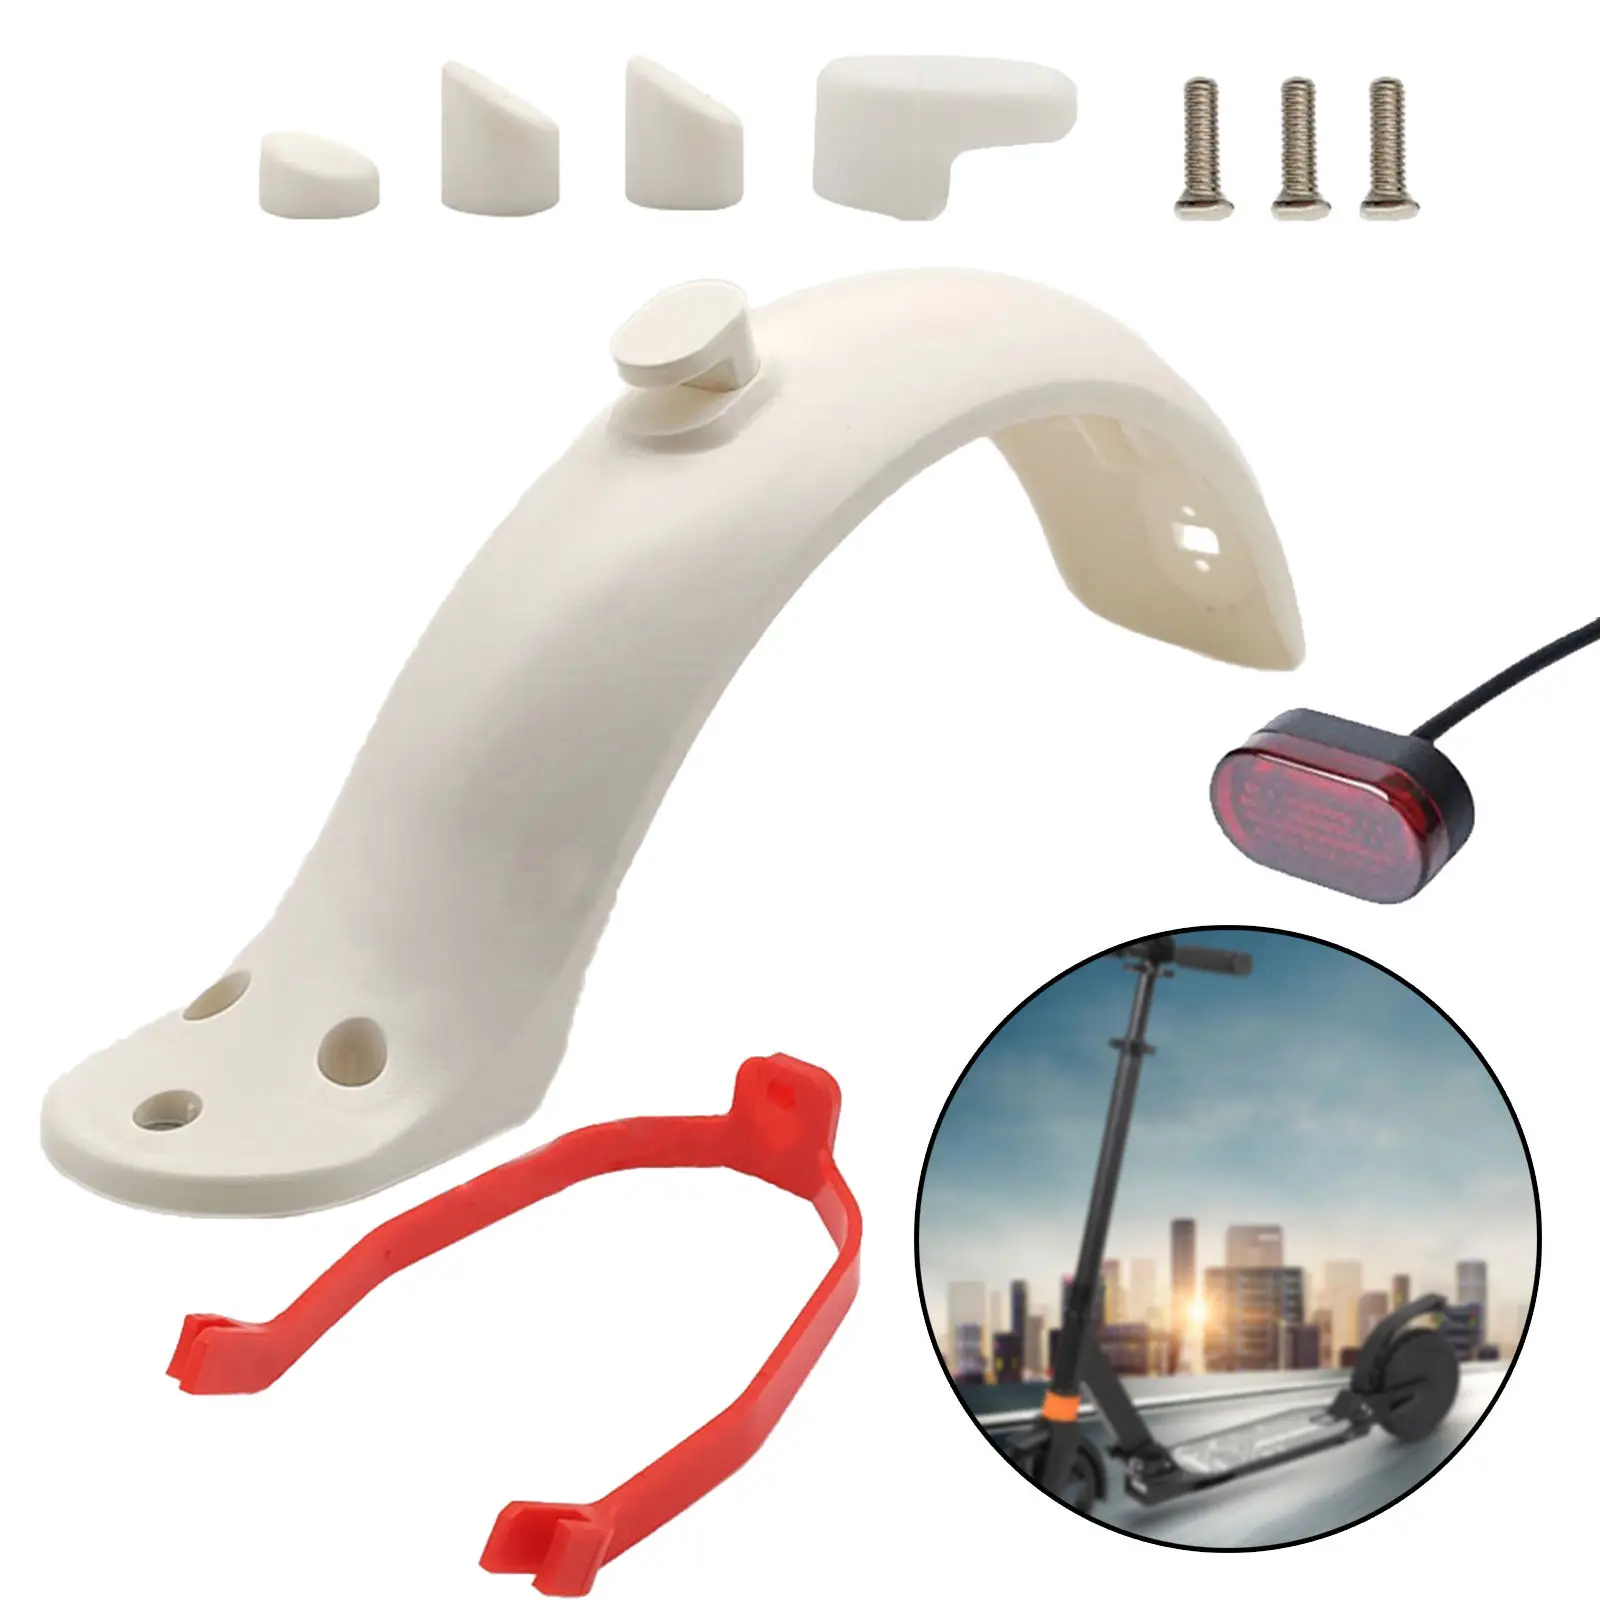 Rear Mudguard Bracket Scooter Replacement Accessory Support for M365 Pro Scooter with Screws